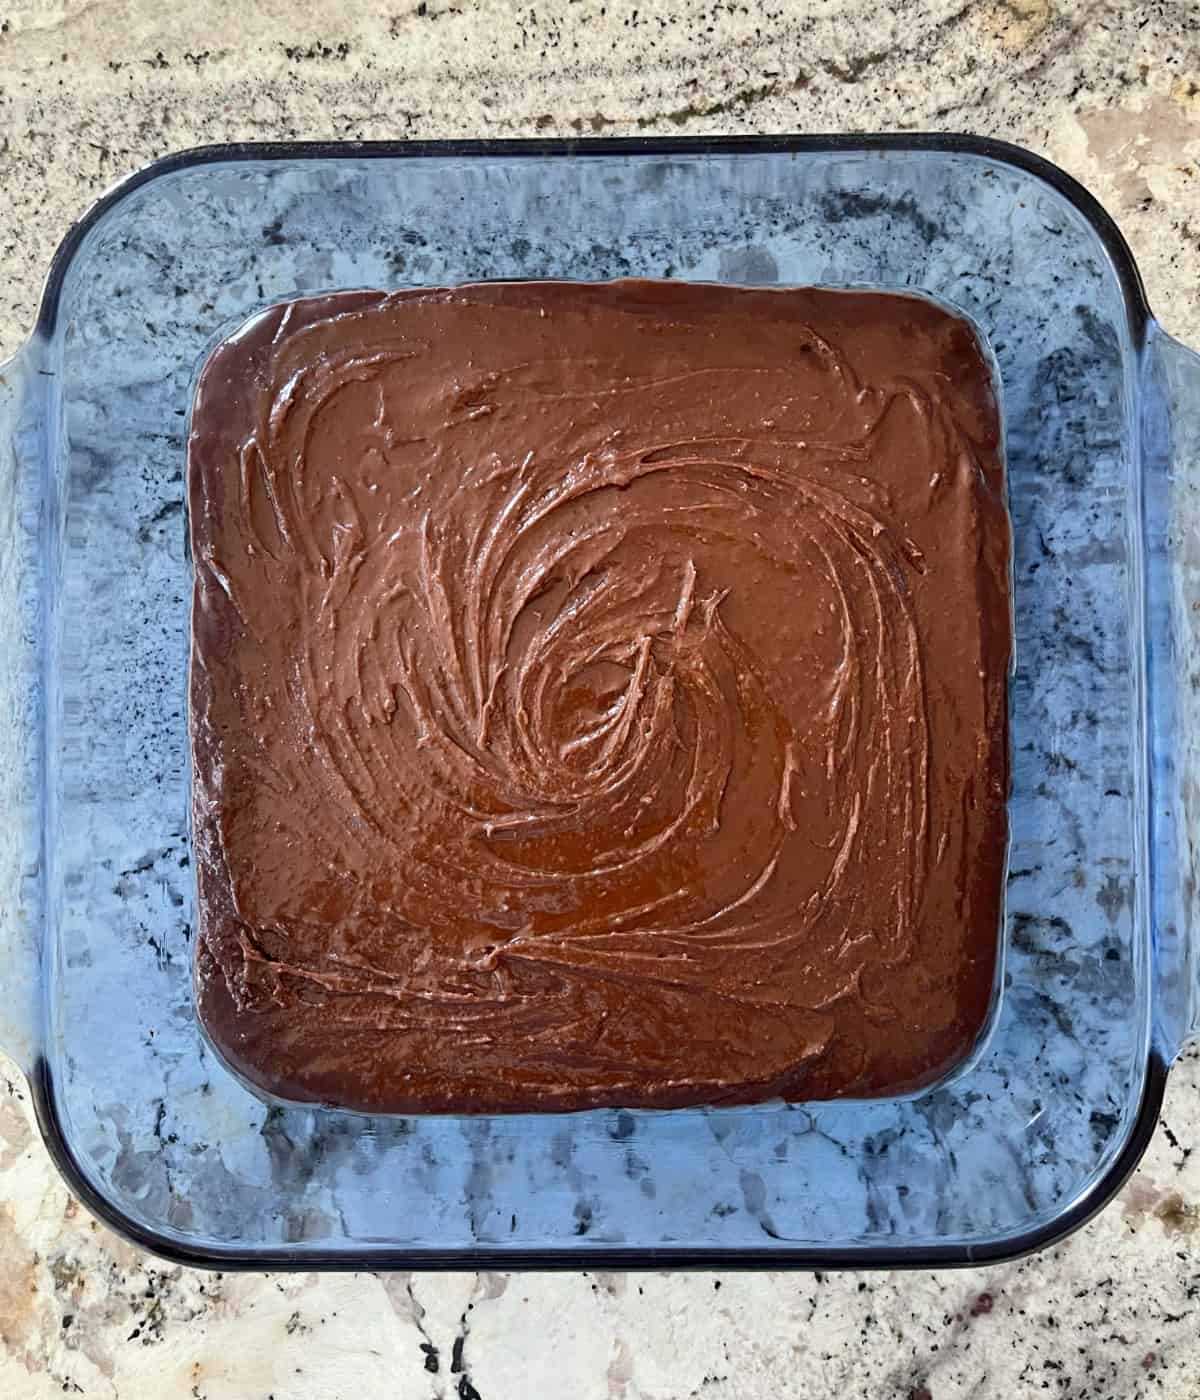 Unbaked Halo Top fudge brownies in blue glass baking dish on granite.